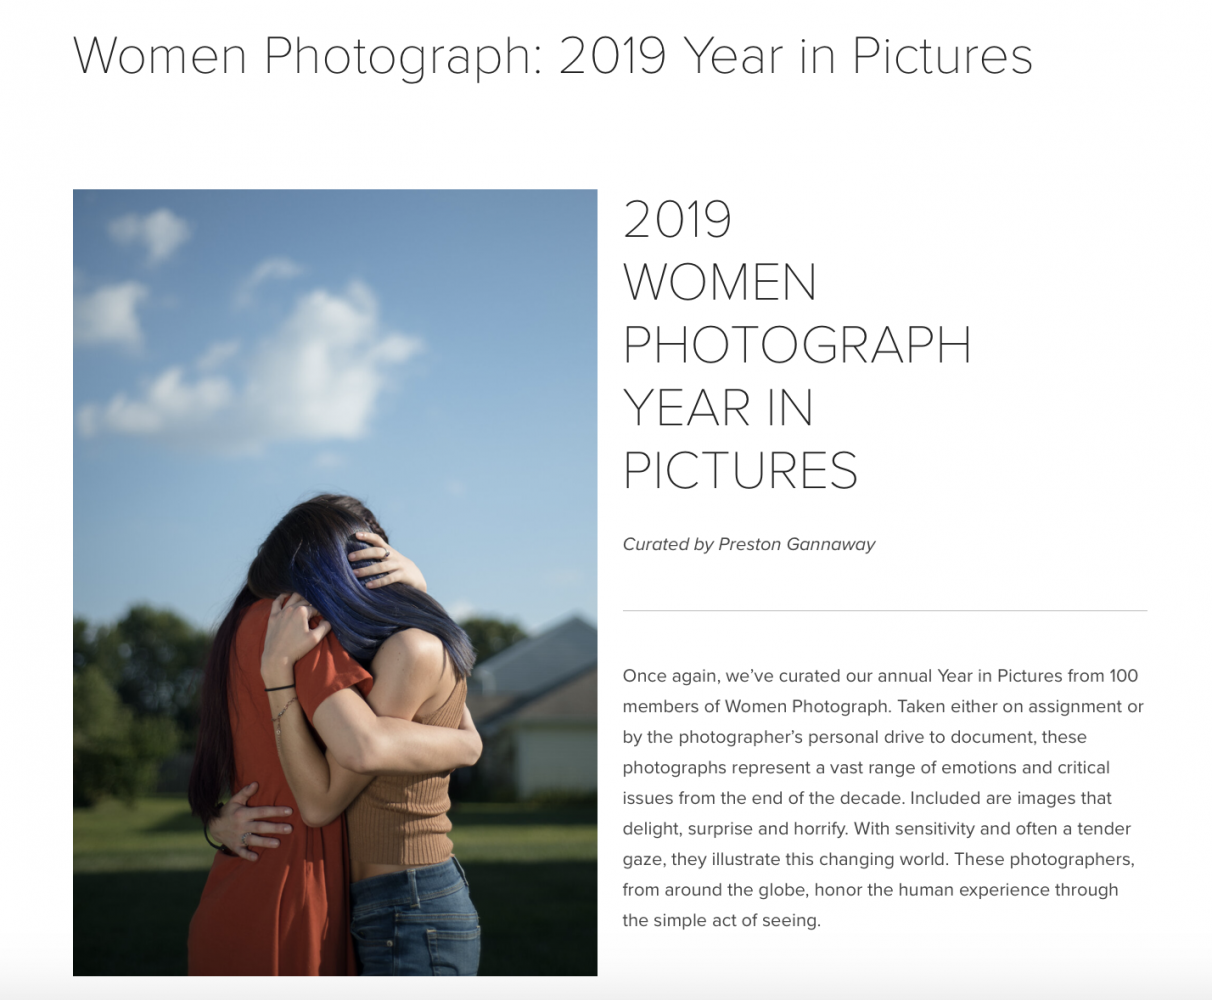 Exited to be included among such talented women + non-binary photographers!